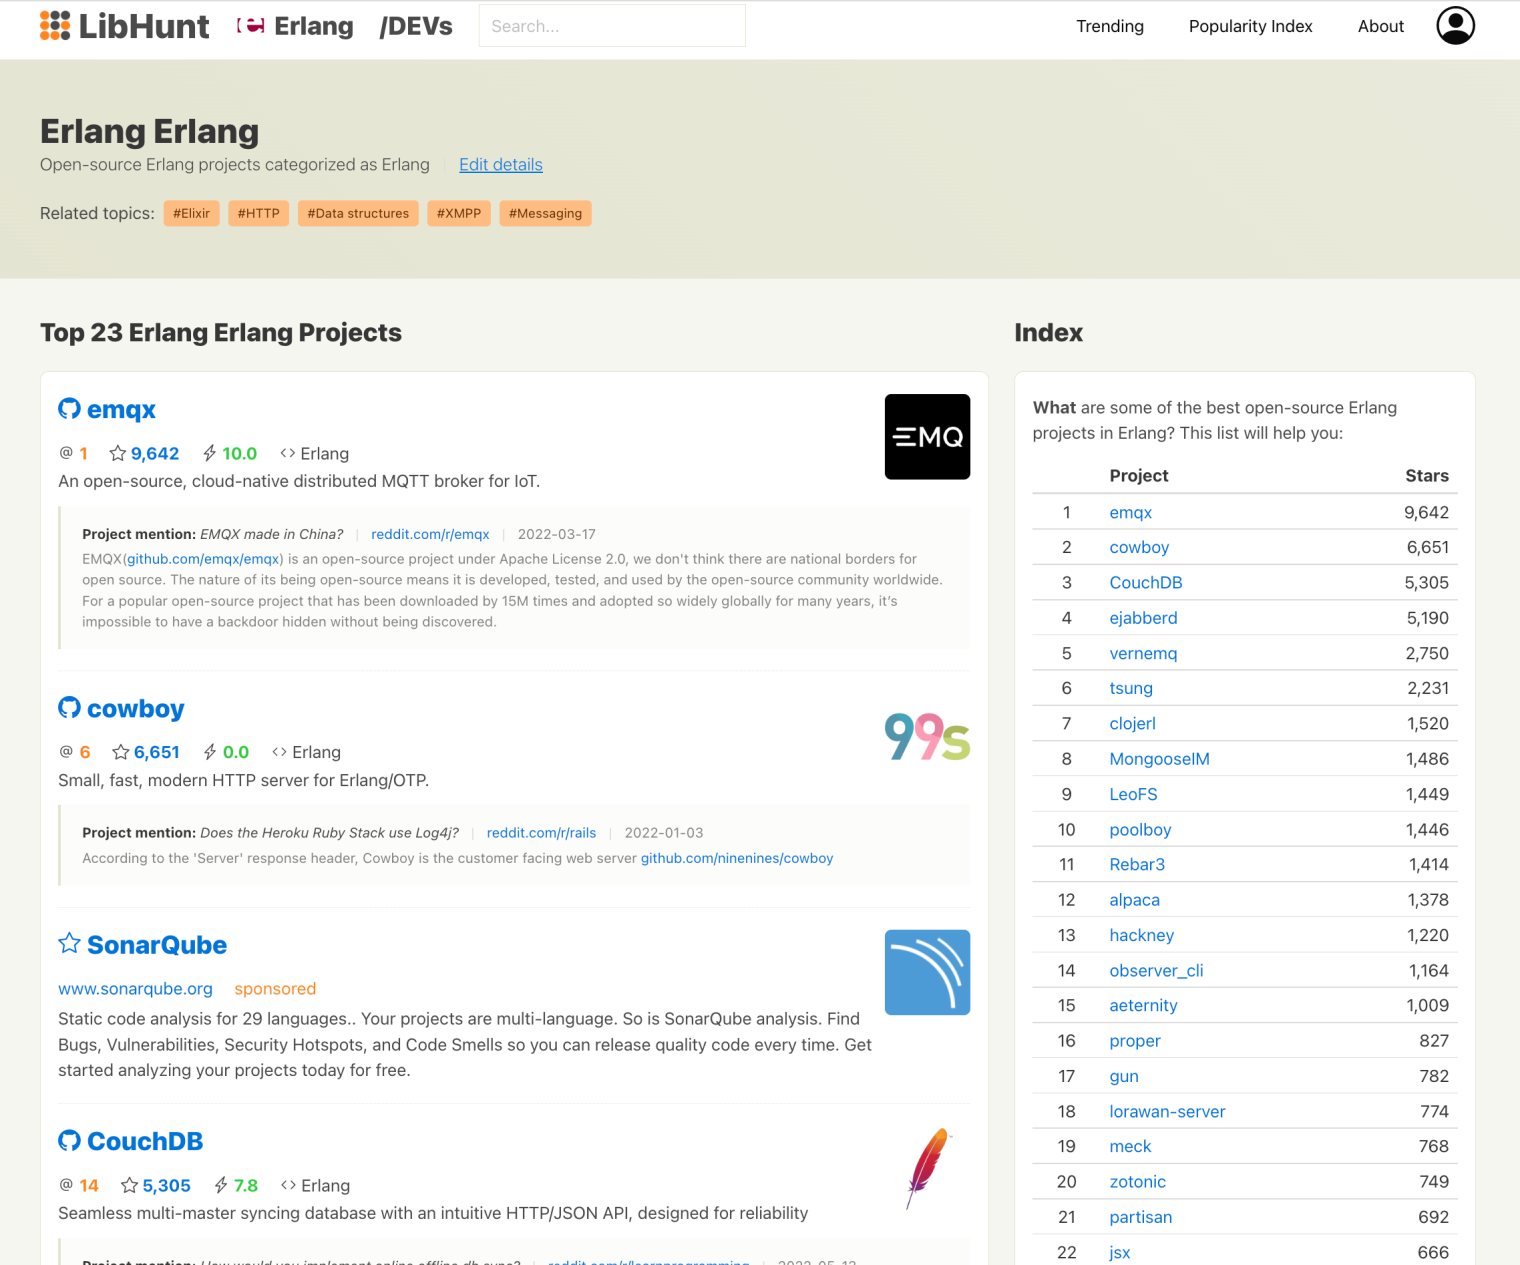 EMQX is now ranked No.1 on the popular open-source Erlang projects